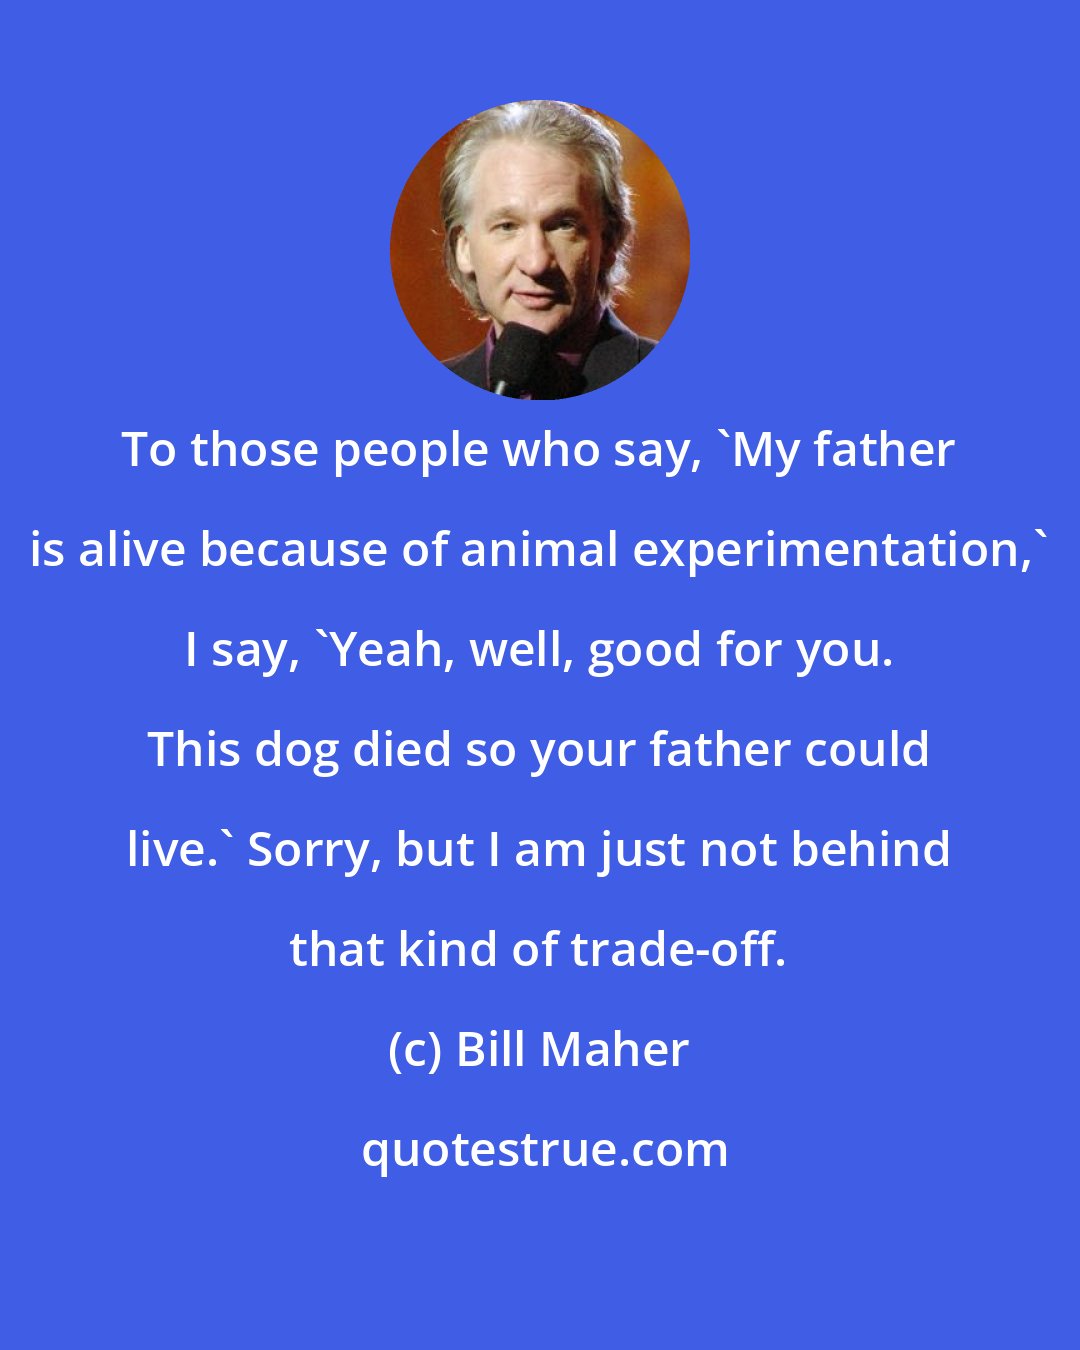 Bill Maher: To those people who say, 'My father is alive because of animal experimentation,' I say, 'Yeah, well, good for you. This dog died so your father could live.' Sorry, but I am just not behind that kind of trade-off.